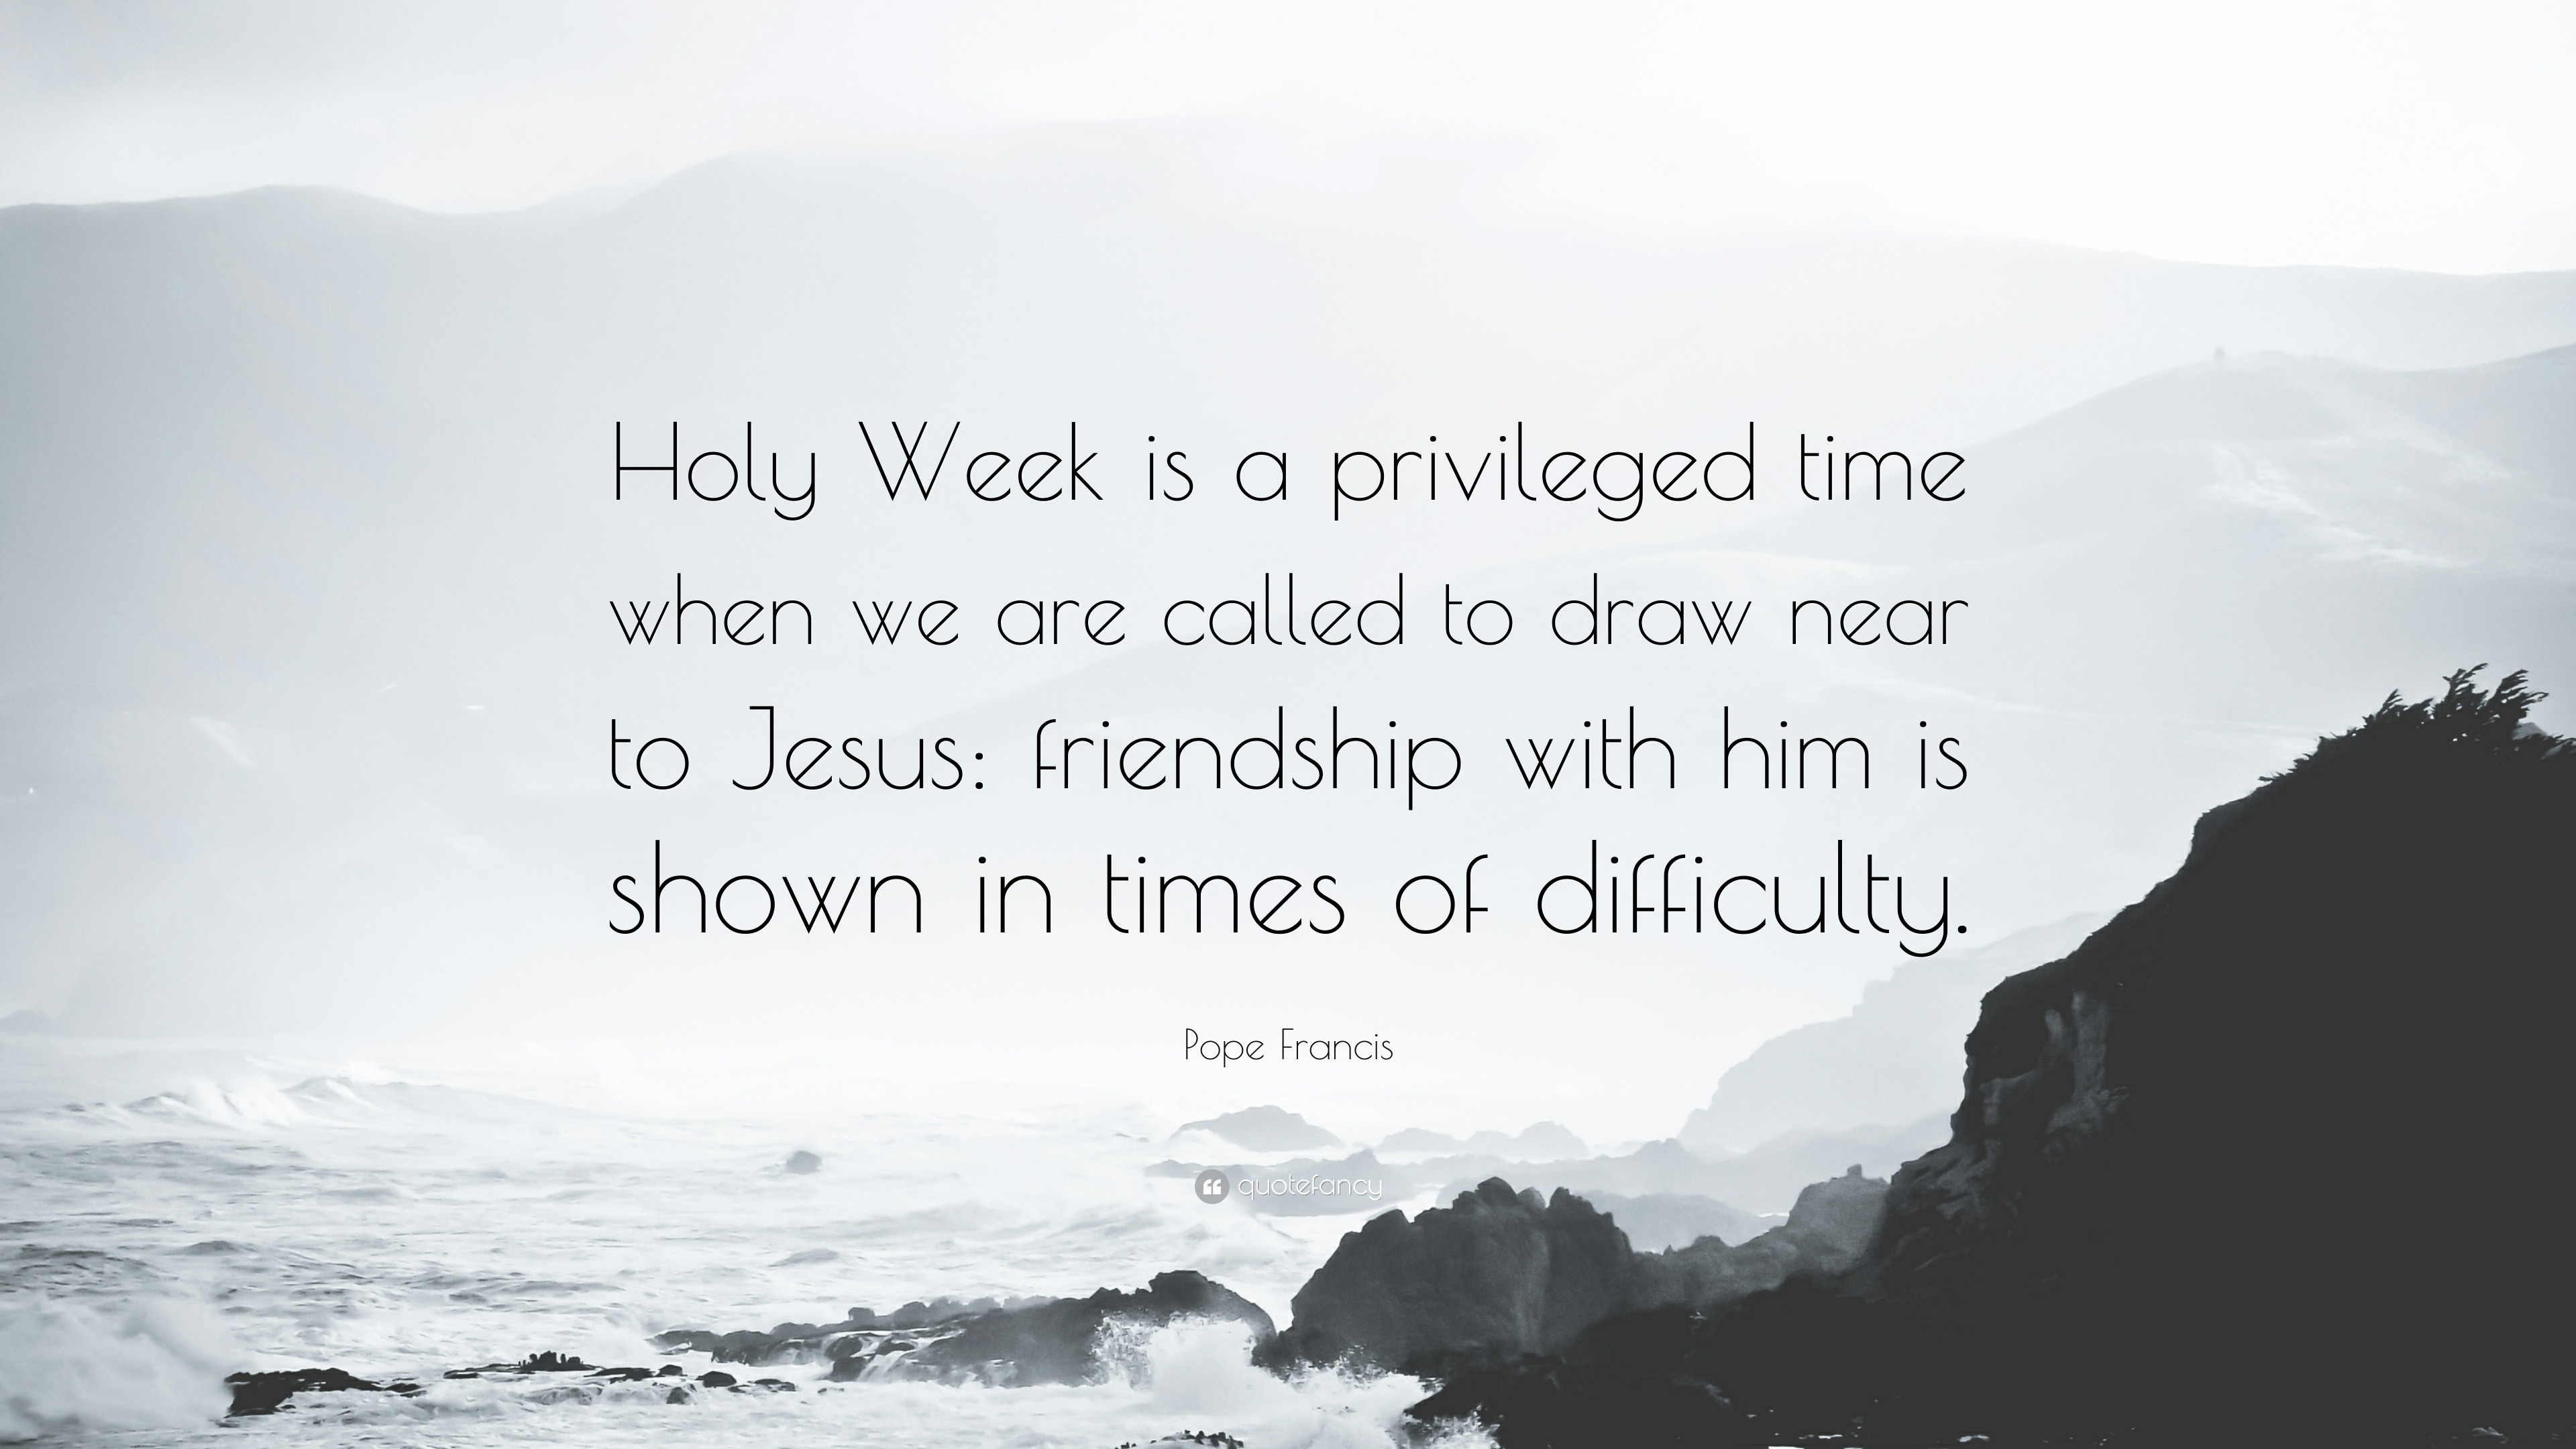 Pope Francis Quote “Holy Week is a privileged time when we are called